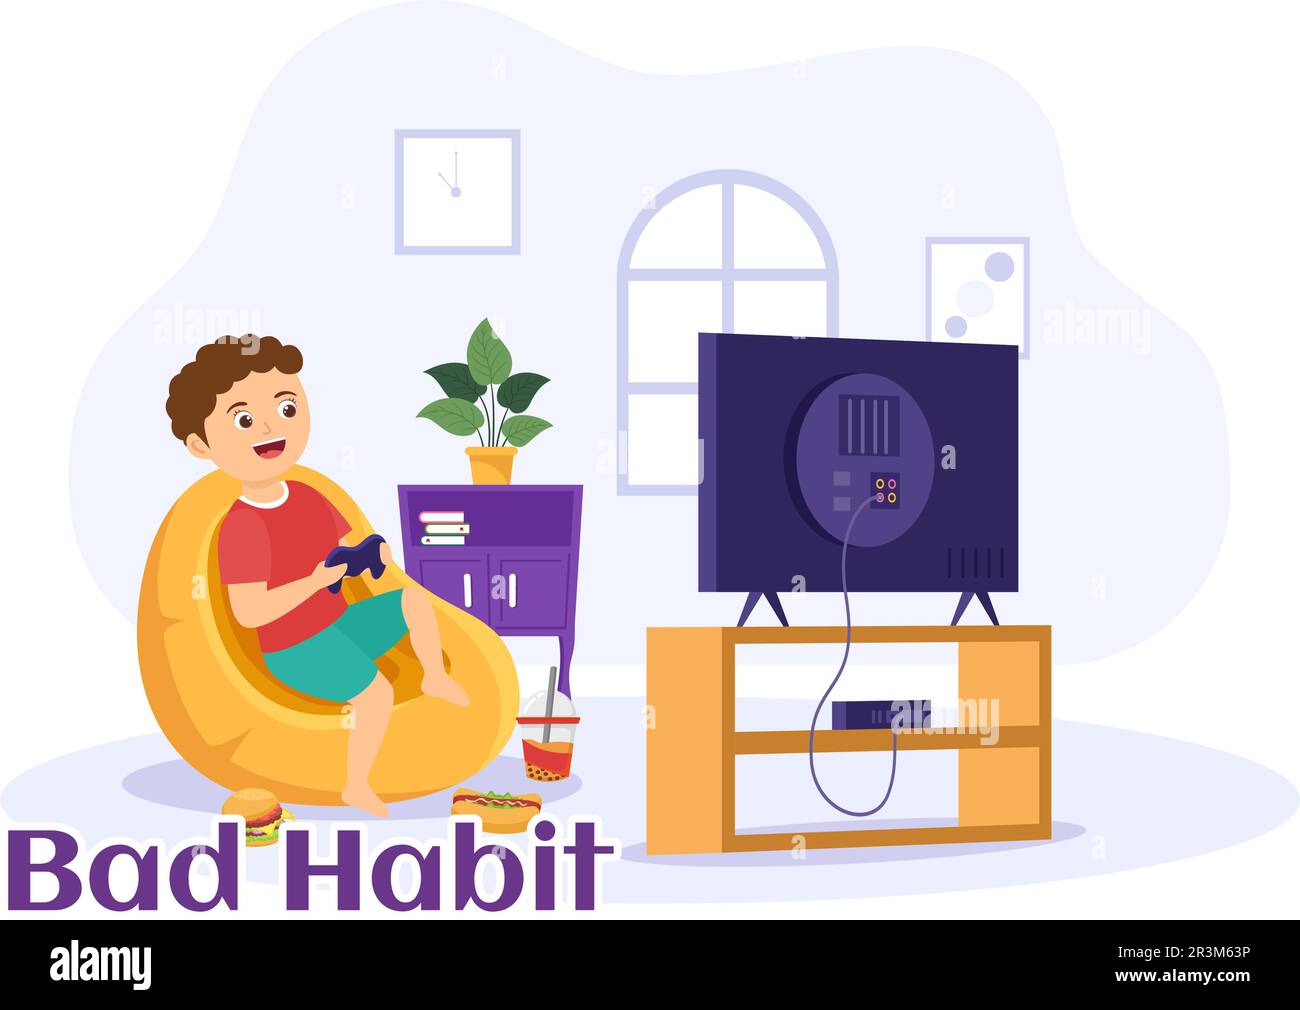 Bad Habit Vector Illustration with Unhealthy Lifestyle like Eating Fast Food or Alcohol Bottle in Kids Cartoon Hand Drawn Landing Page Templates Stock Vector